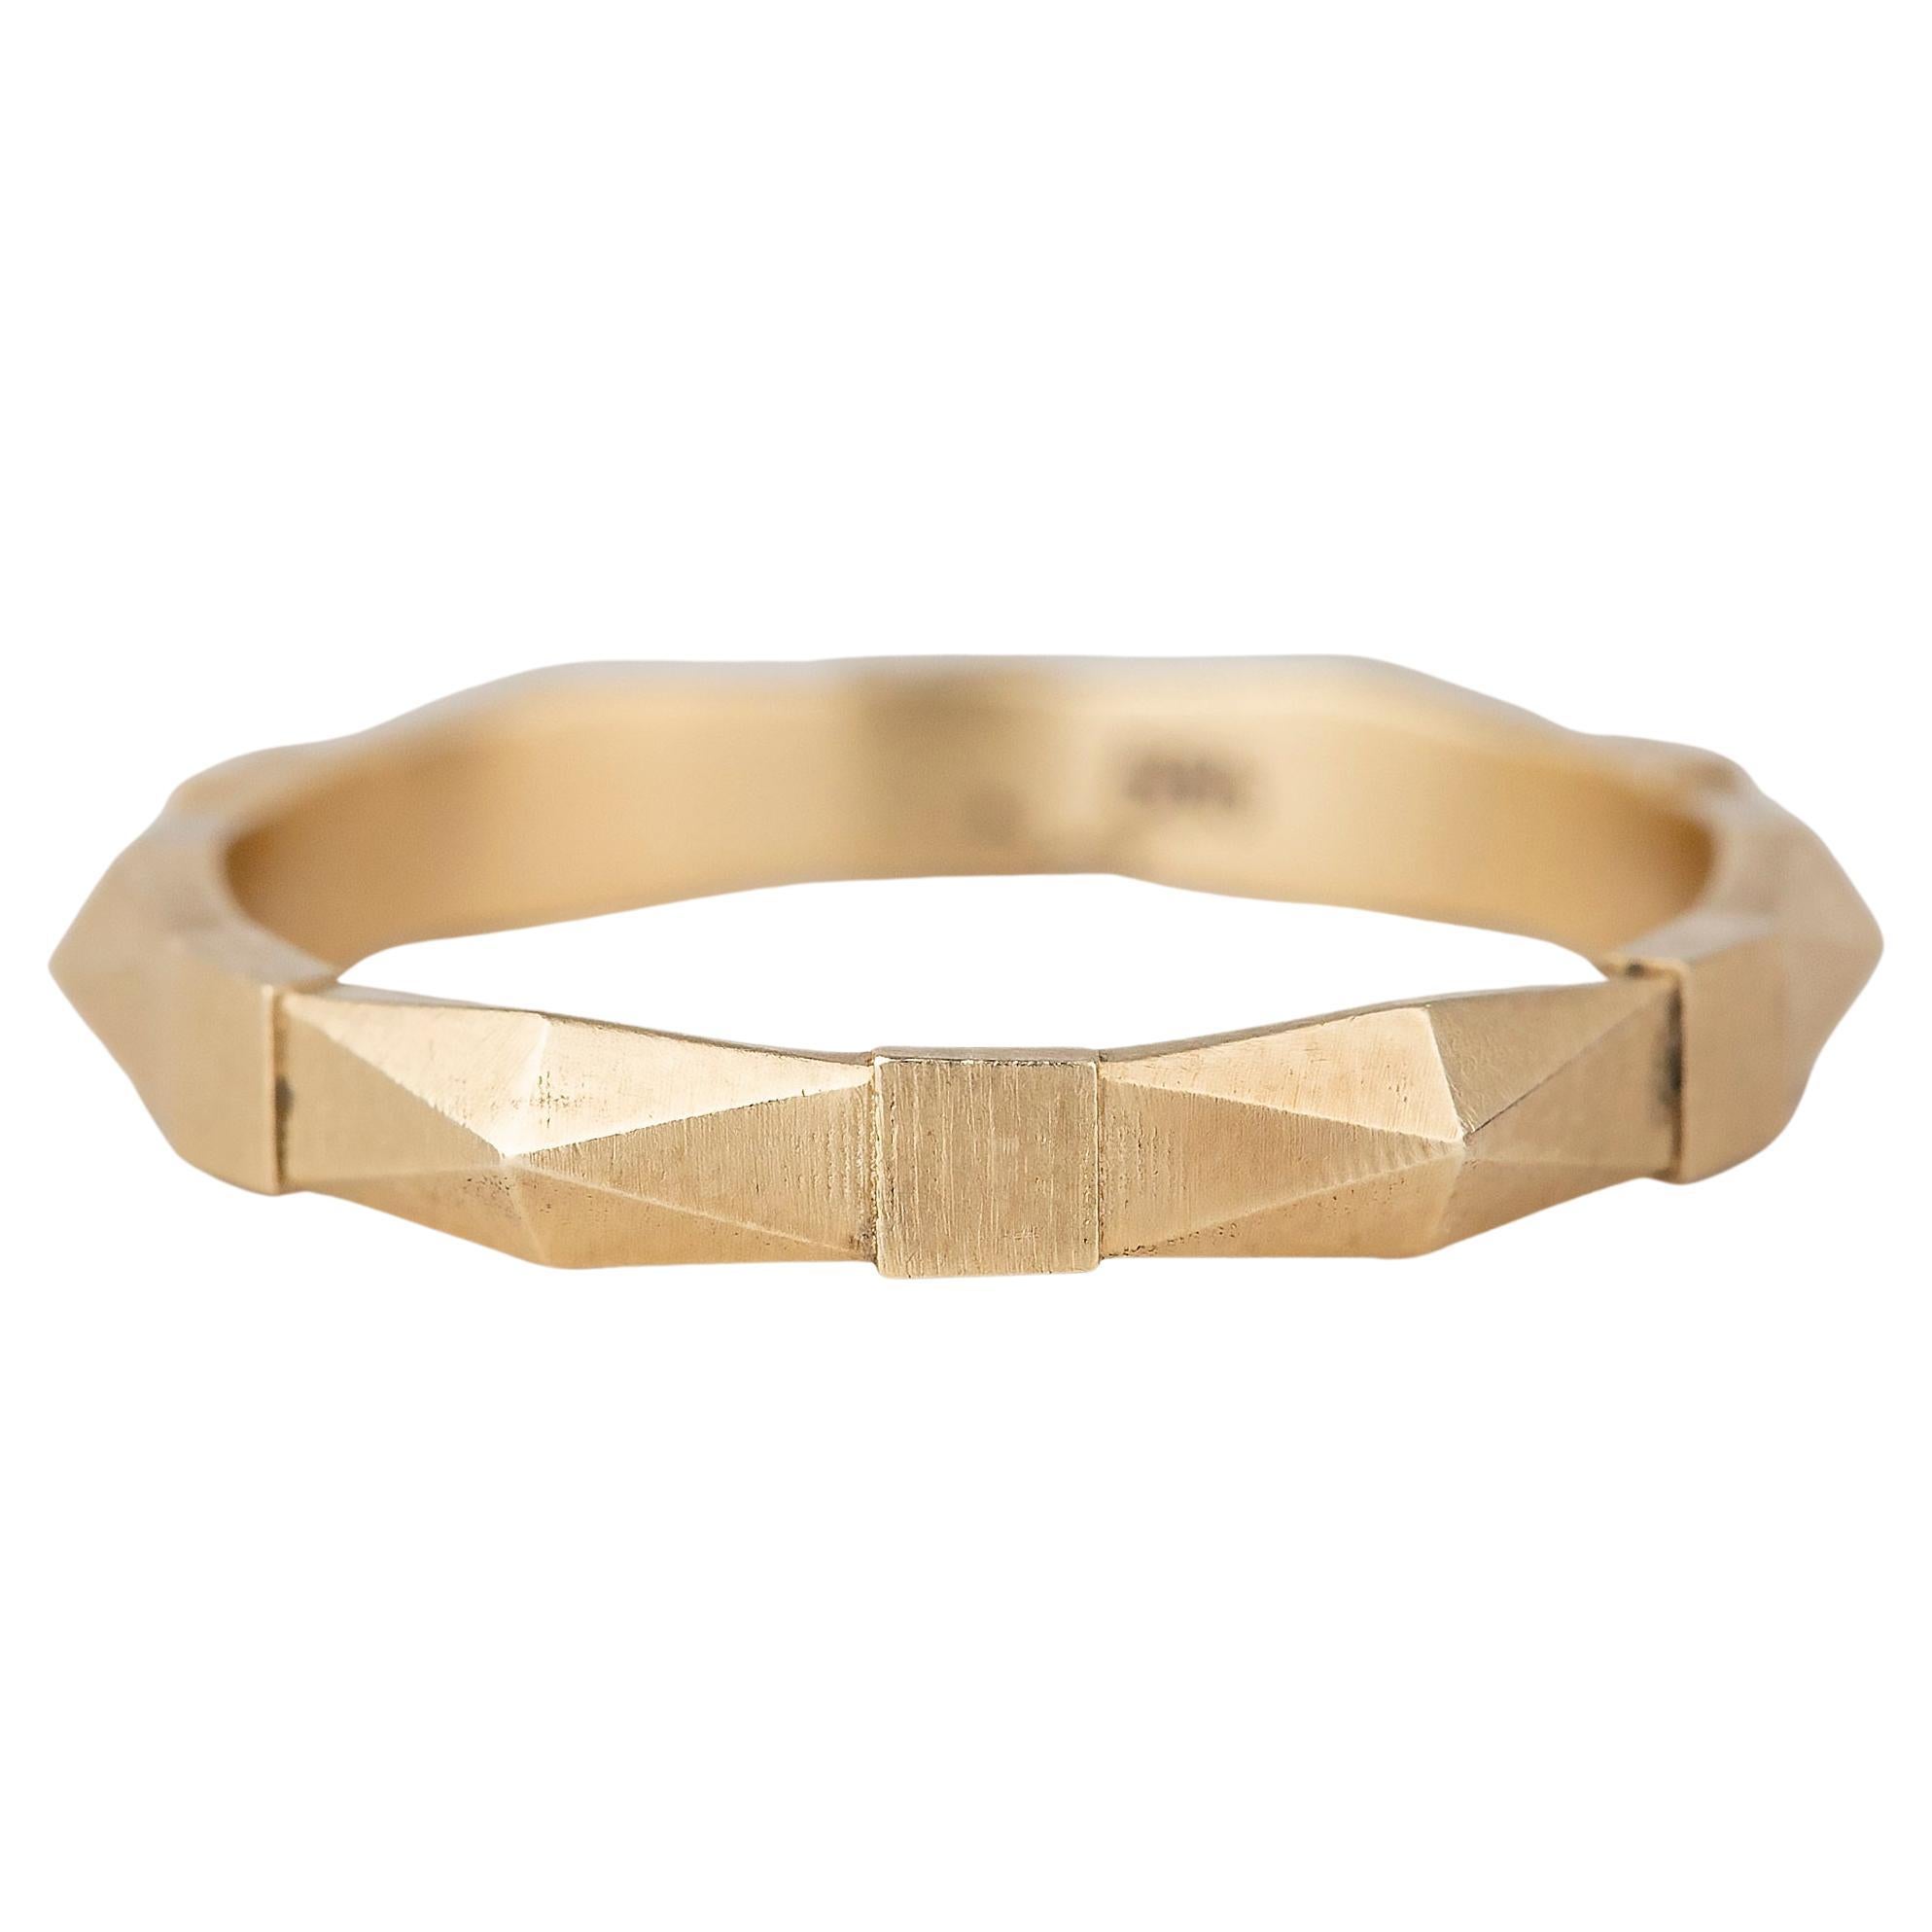 For Sale:  Vintage Style 14K Gold Geometrical Wedding Band for Men and Women